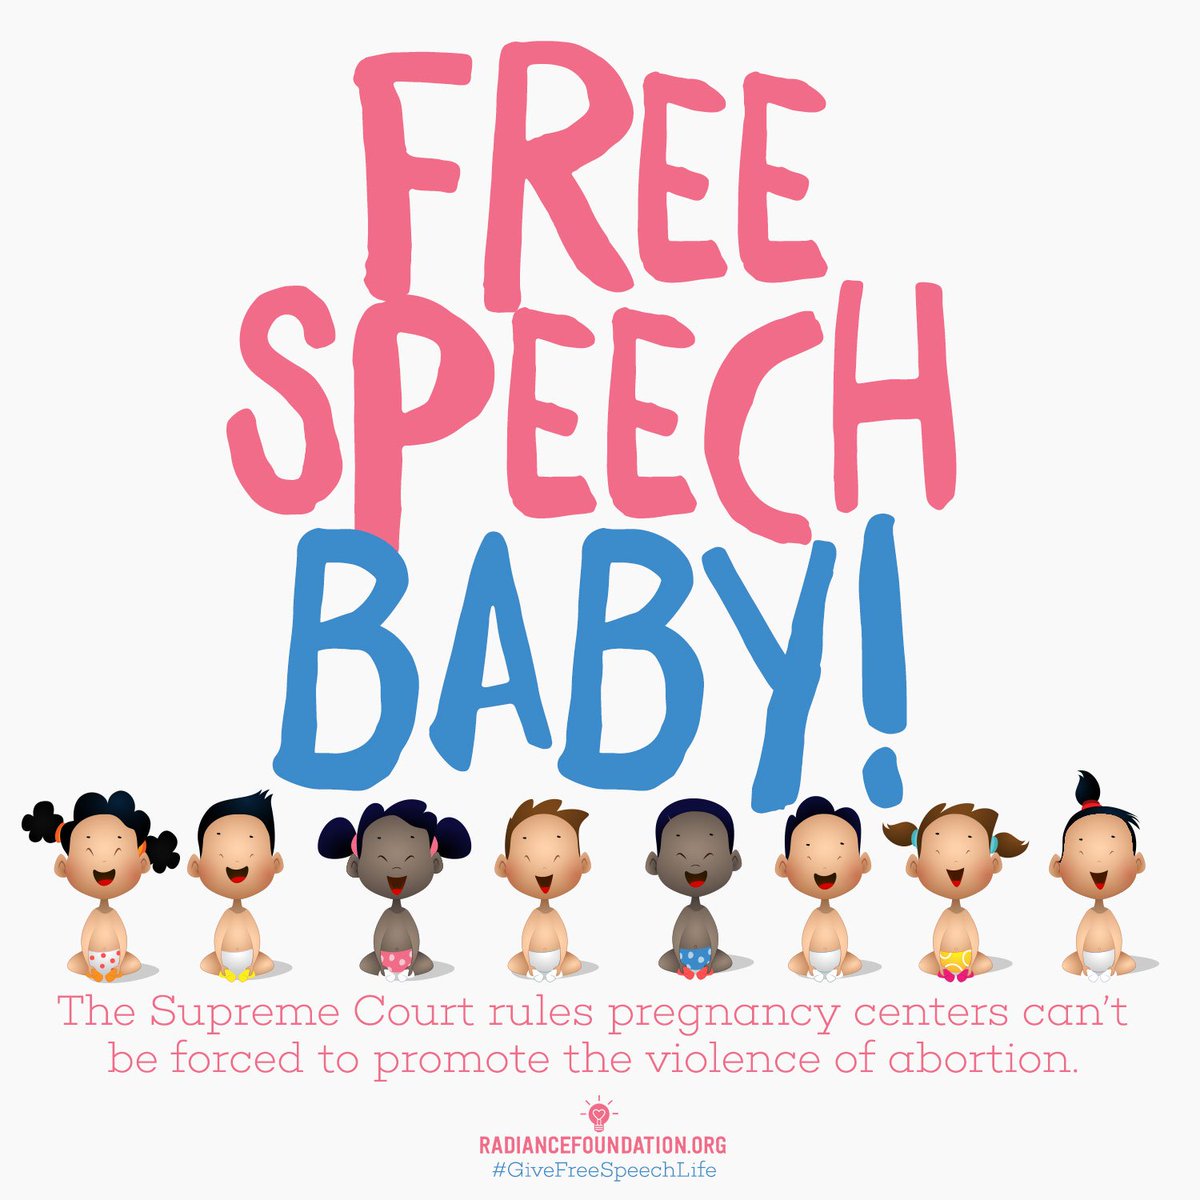 #FreeSpeech baby! The Supreme Court rules that pregnancy care centers (which provide free services for mothers and their children) can't be forced by the state of California to promote the violence of abortion. #LifeWins #GiveFreeSpeechLife #ProLife #ProWoman